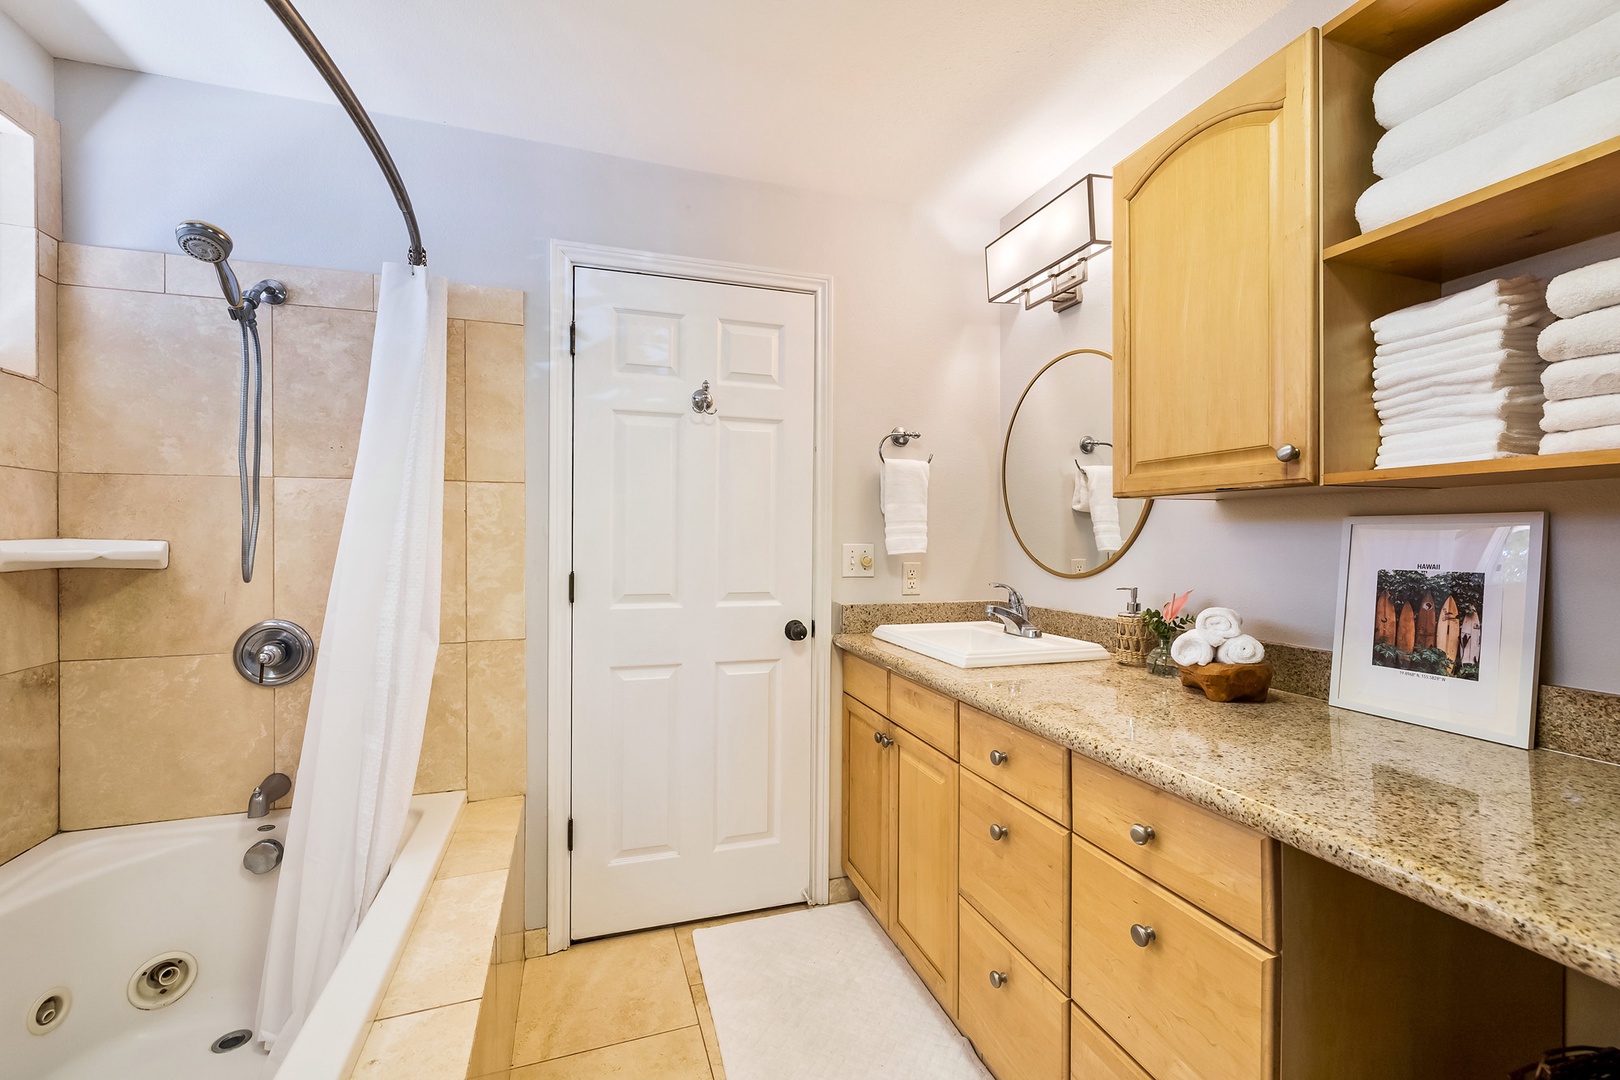 Honolulu Vacation Rentals, Hale Ho'omaha - Guest Bedroom 5 ensuite with shower/tub combo